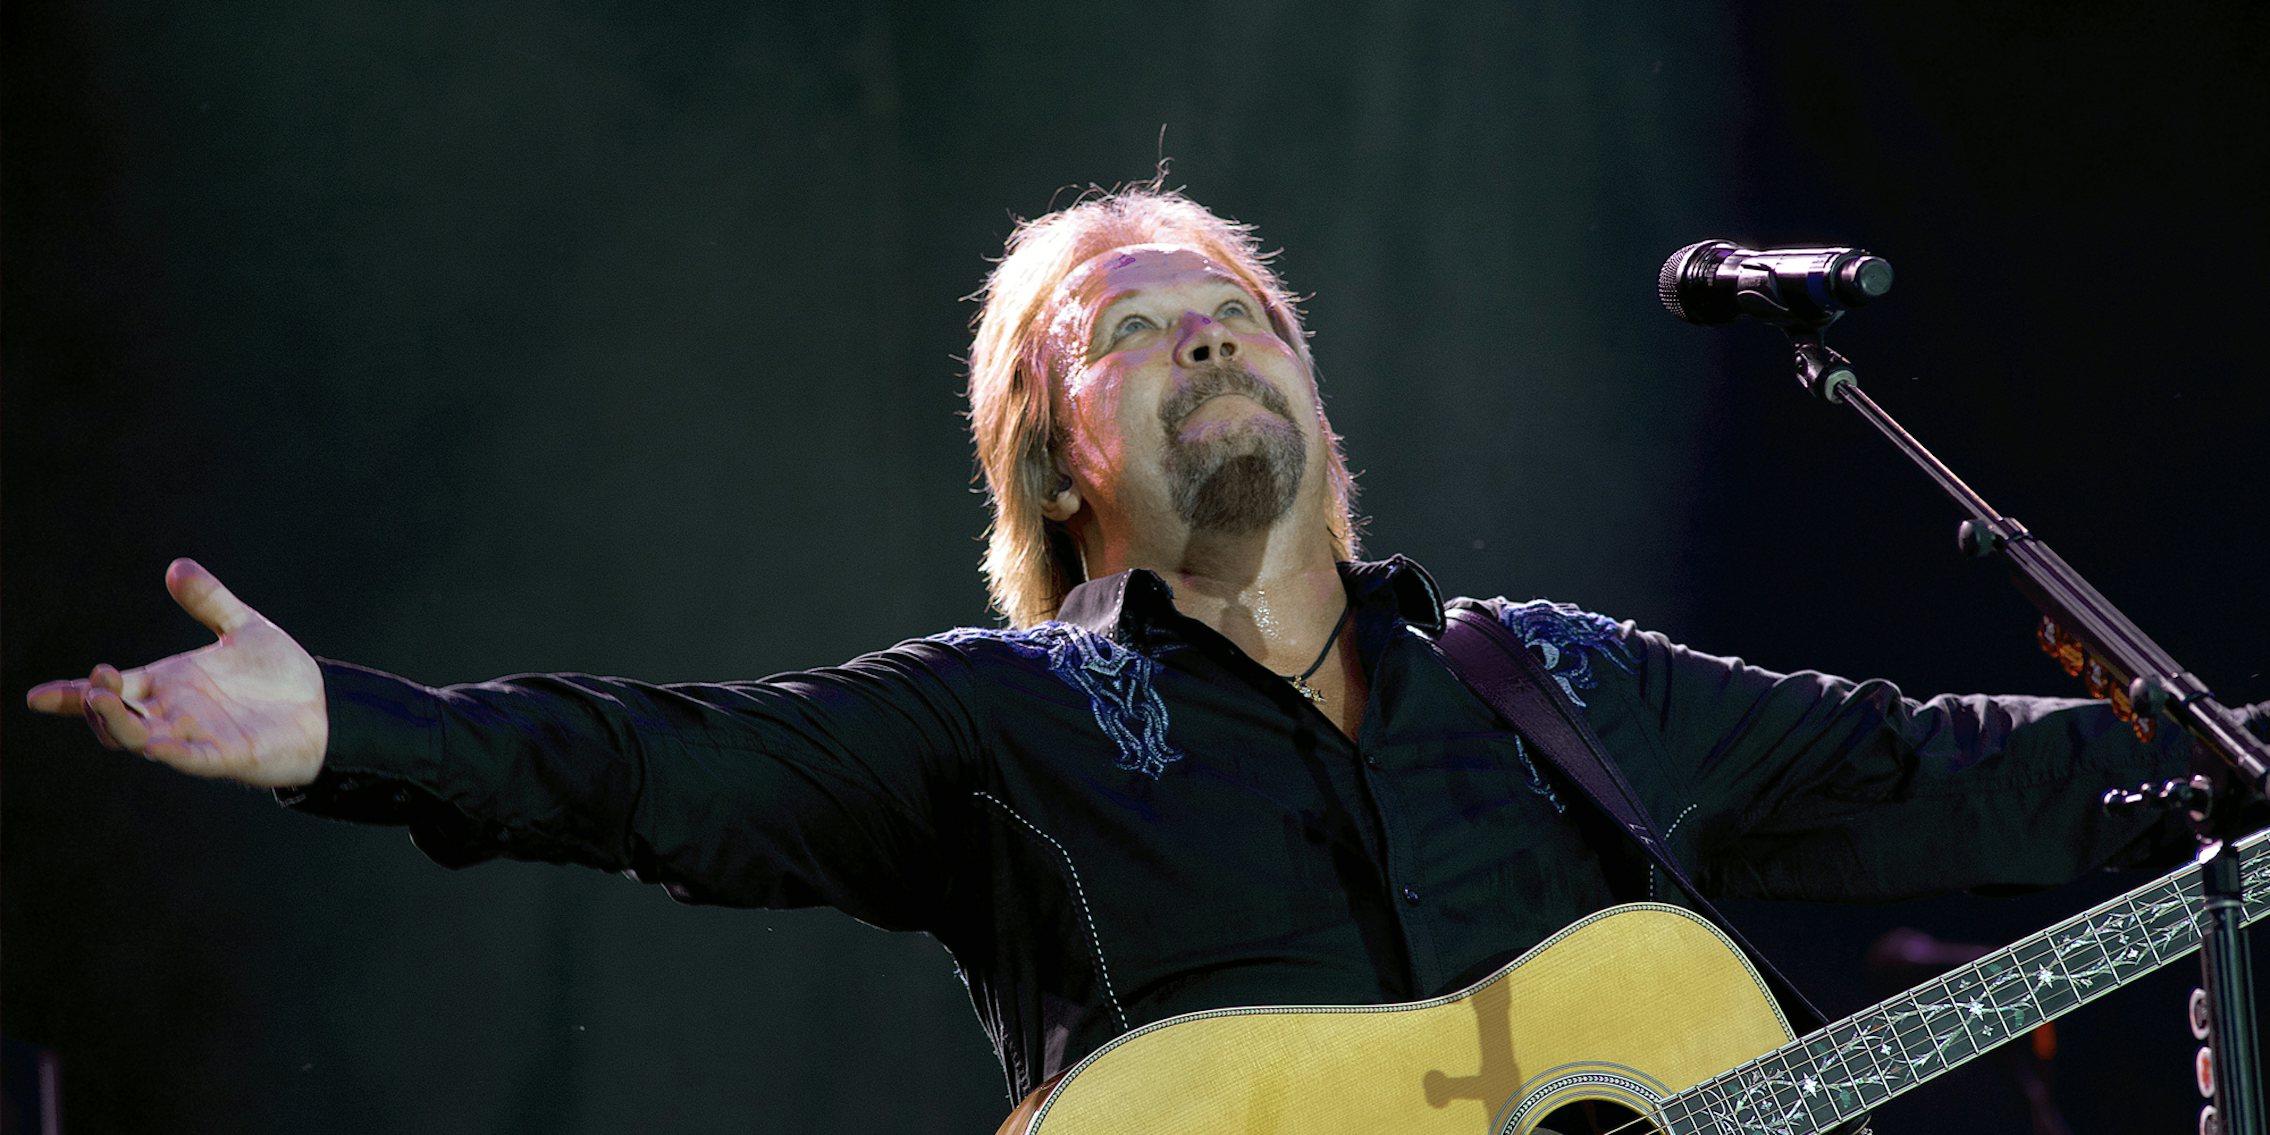 Travis Tritt with arms out with guitar and microphone in front of dark background